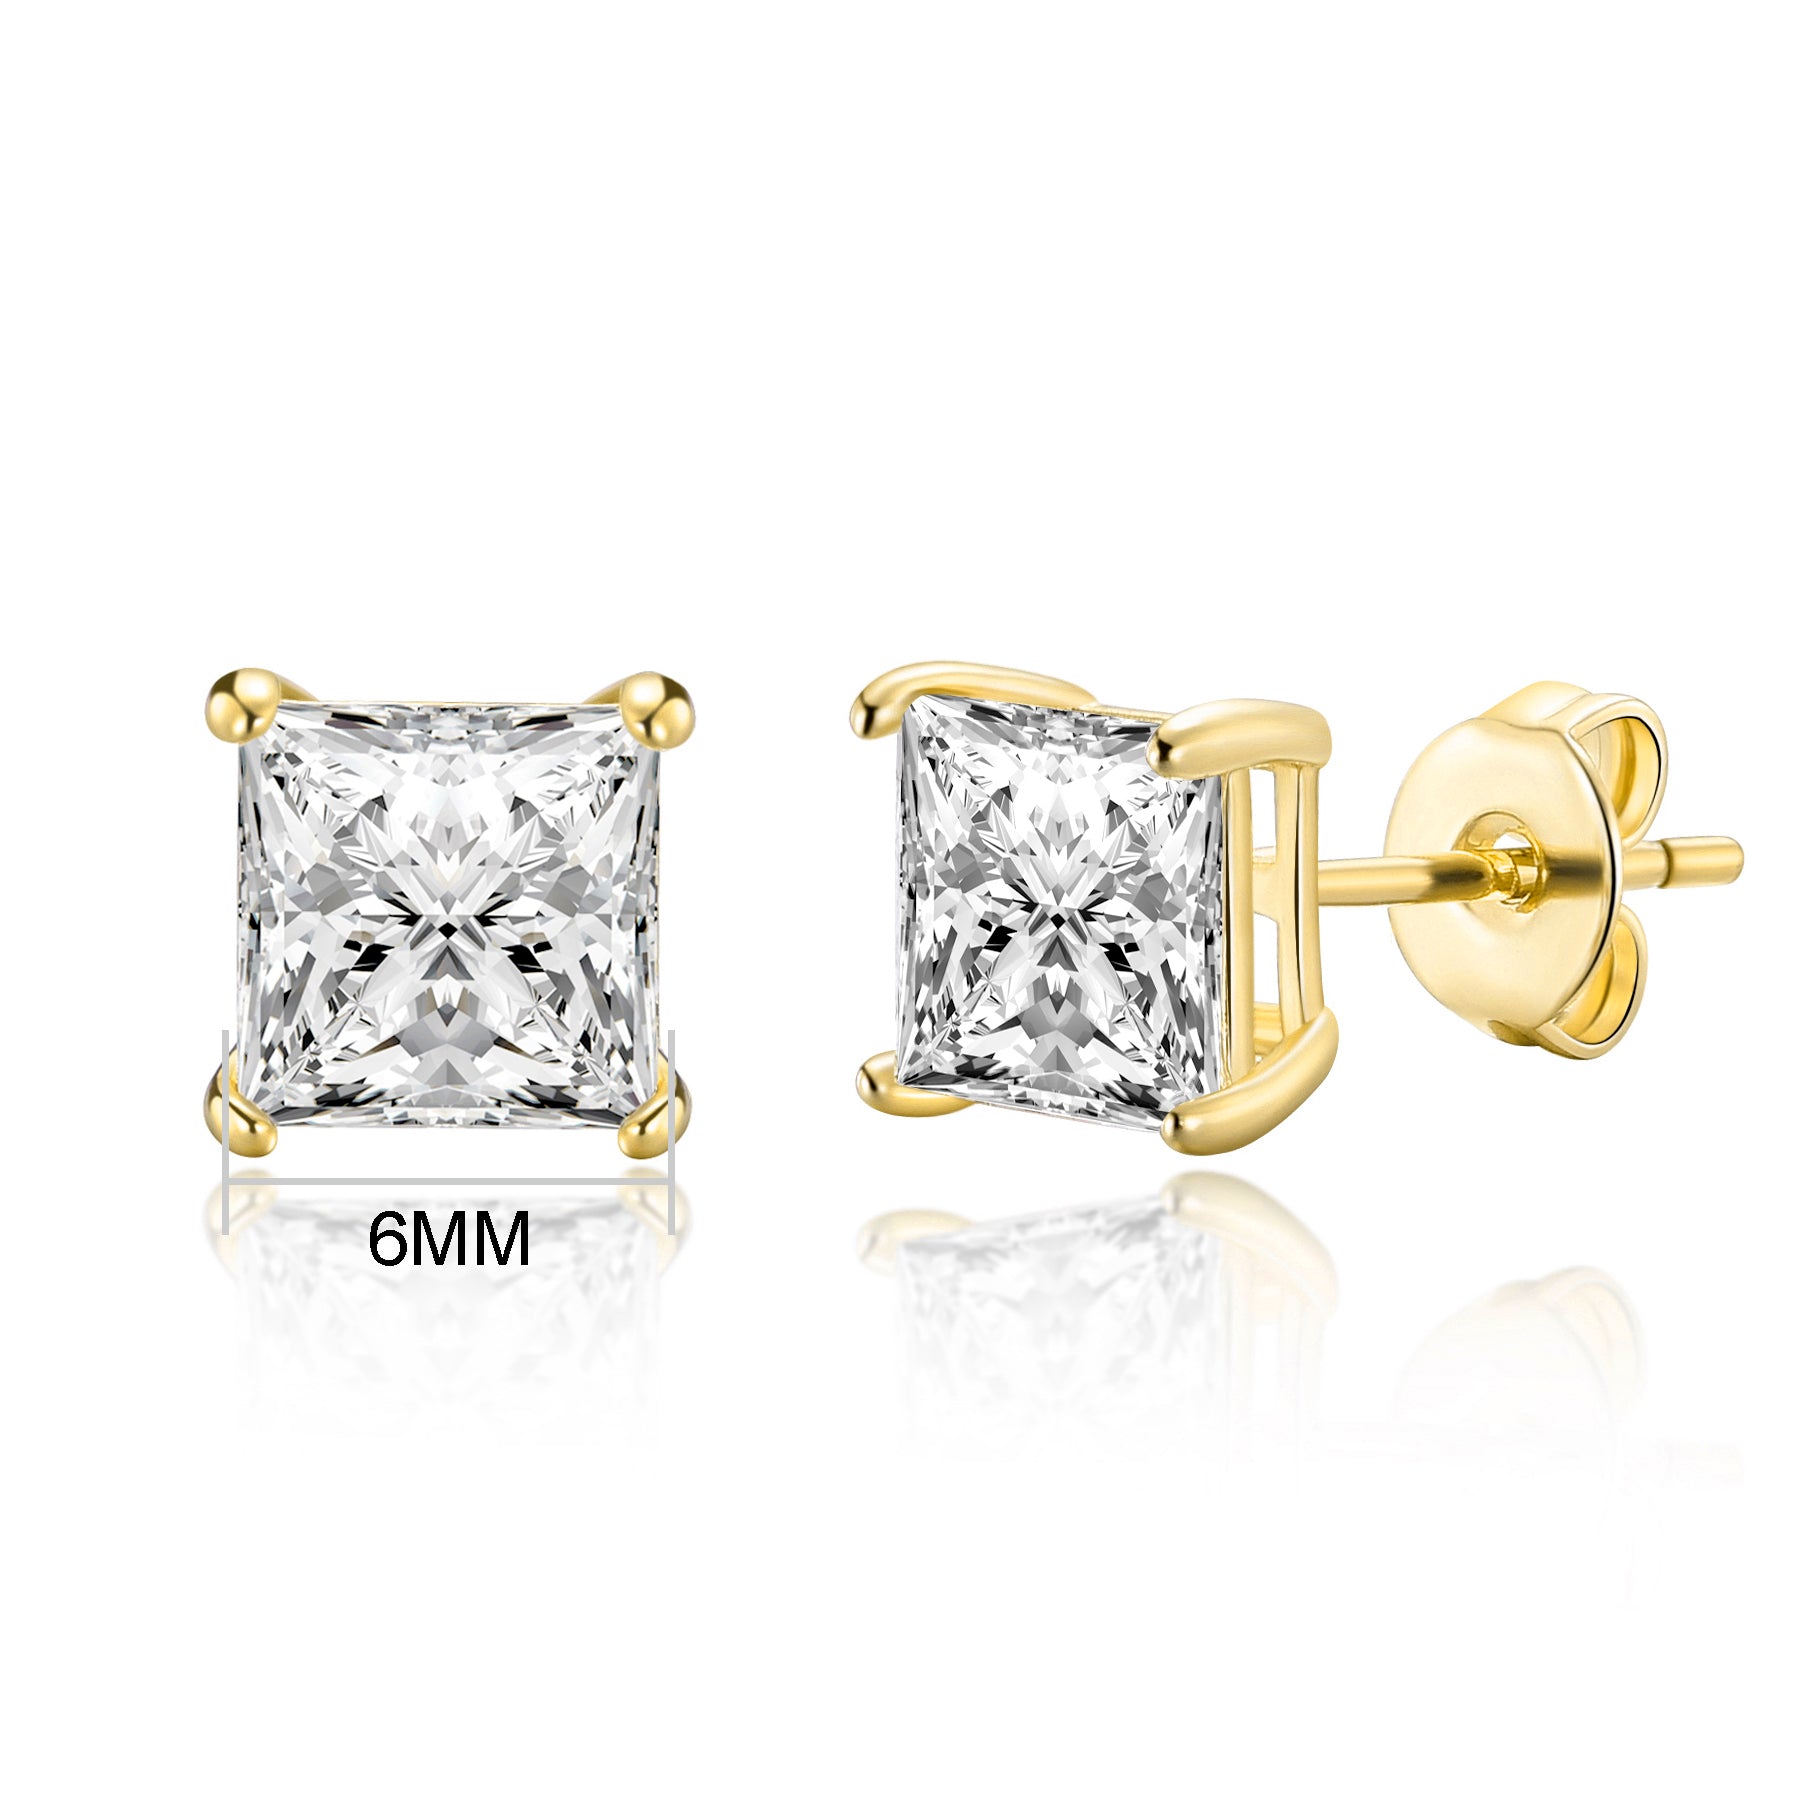 Gold Plated Square Earrings Created with Zircondia® Crystals